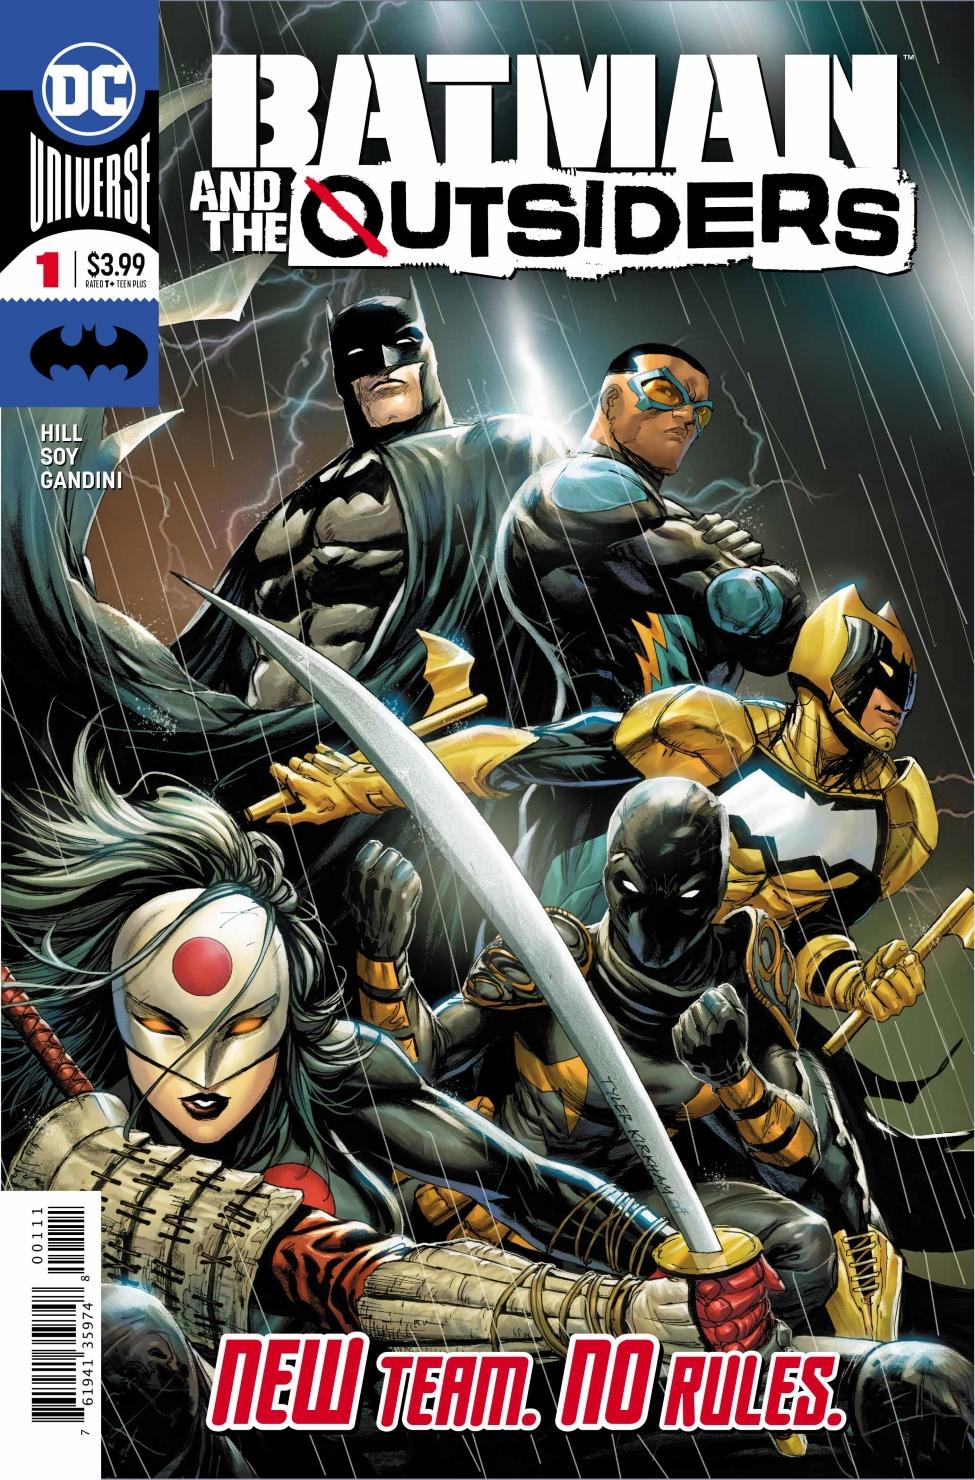 Batman and the Outsiders Vol. 3 #1